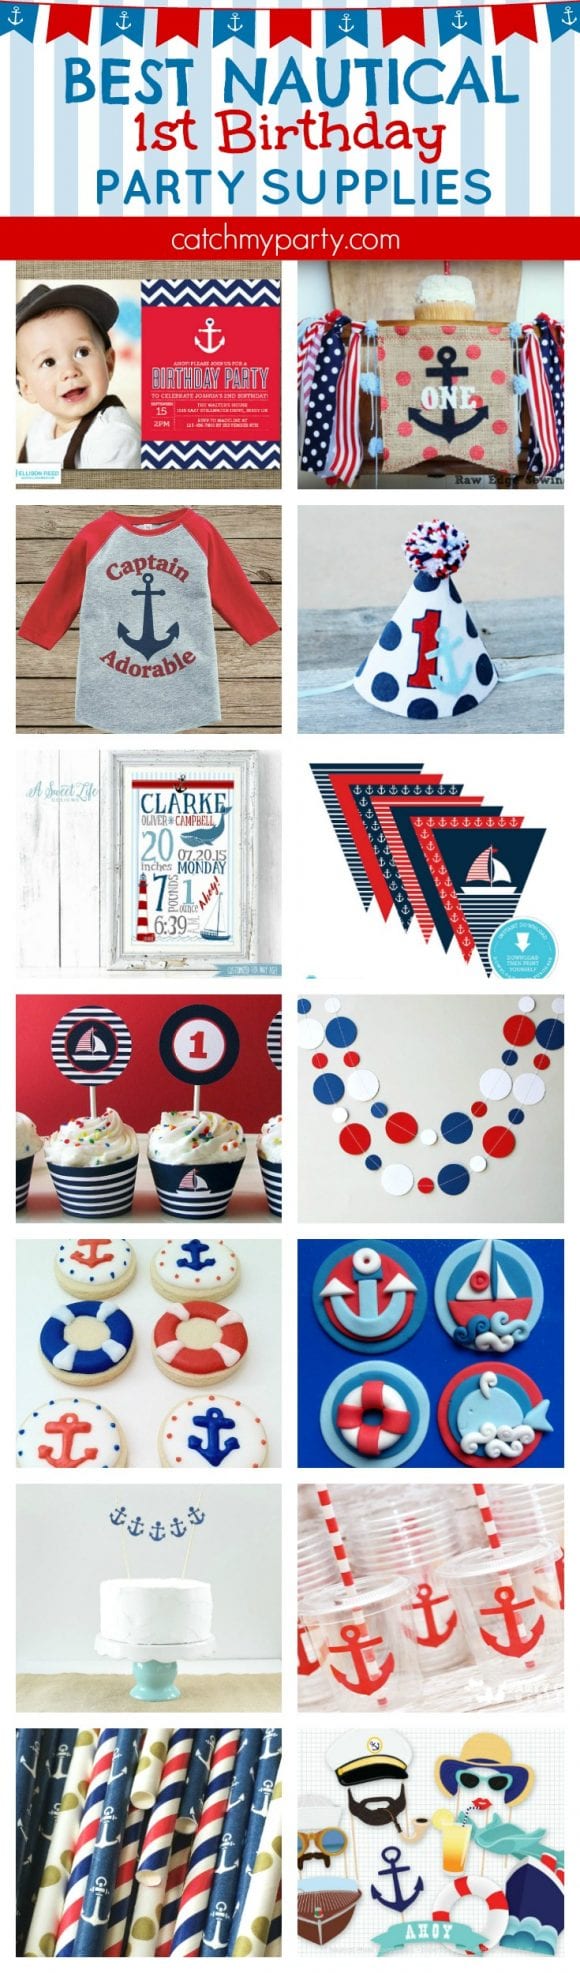 Best nautical 1st birthday party supplies | CatchMyparty.com